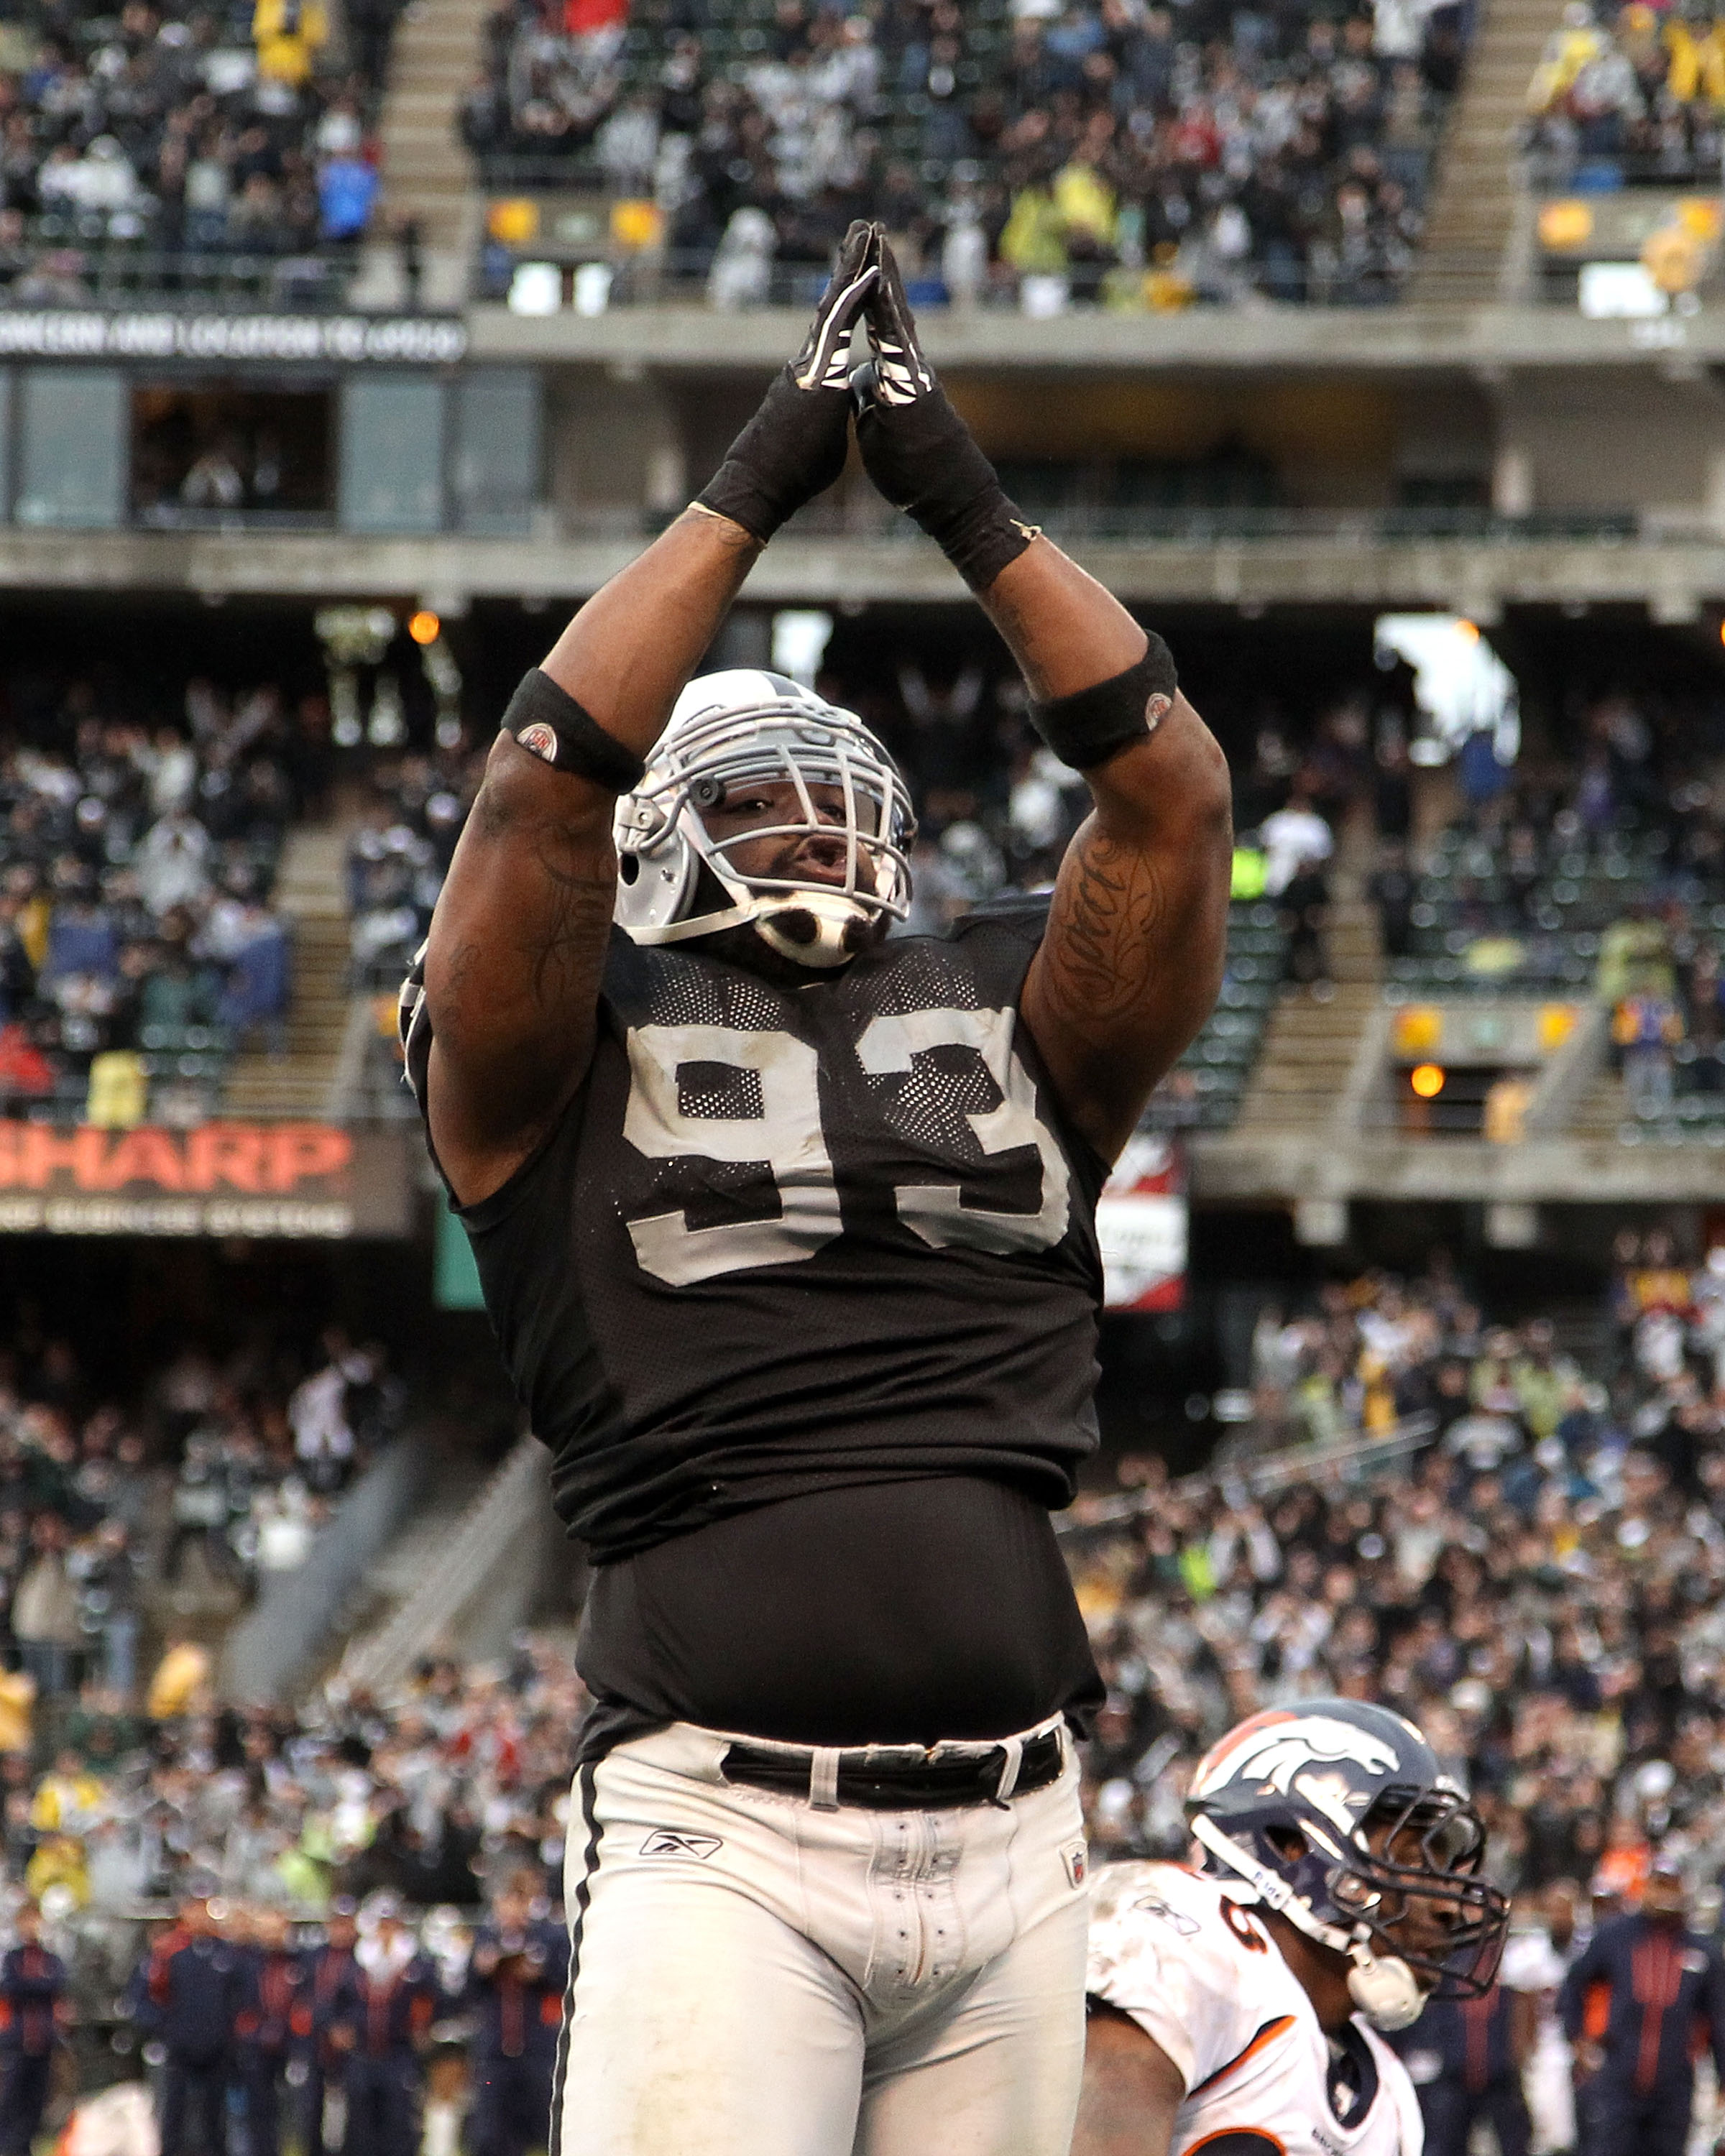 OAKLAND, CA - DECEMBER 19:  Tommy Kelly #93 of the Oakland Raiders celebrates after the Raiders scored a safety during their game against the Denver Broncos at Oakland-Alameda County Coliseum on December 19, 2010 in Oakland, California.  (Photo by Ezra Sh